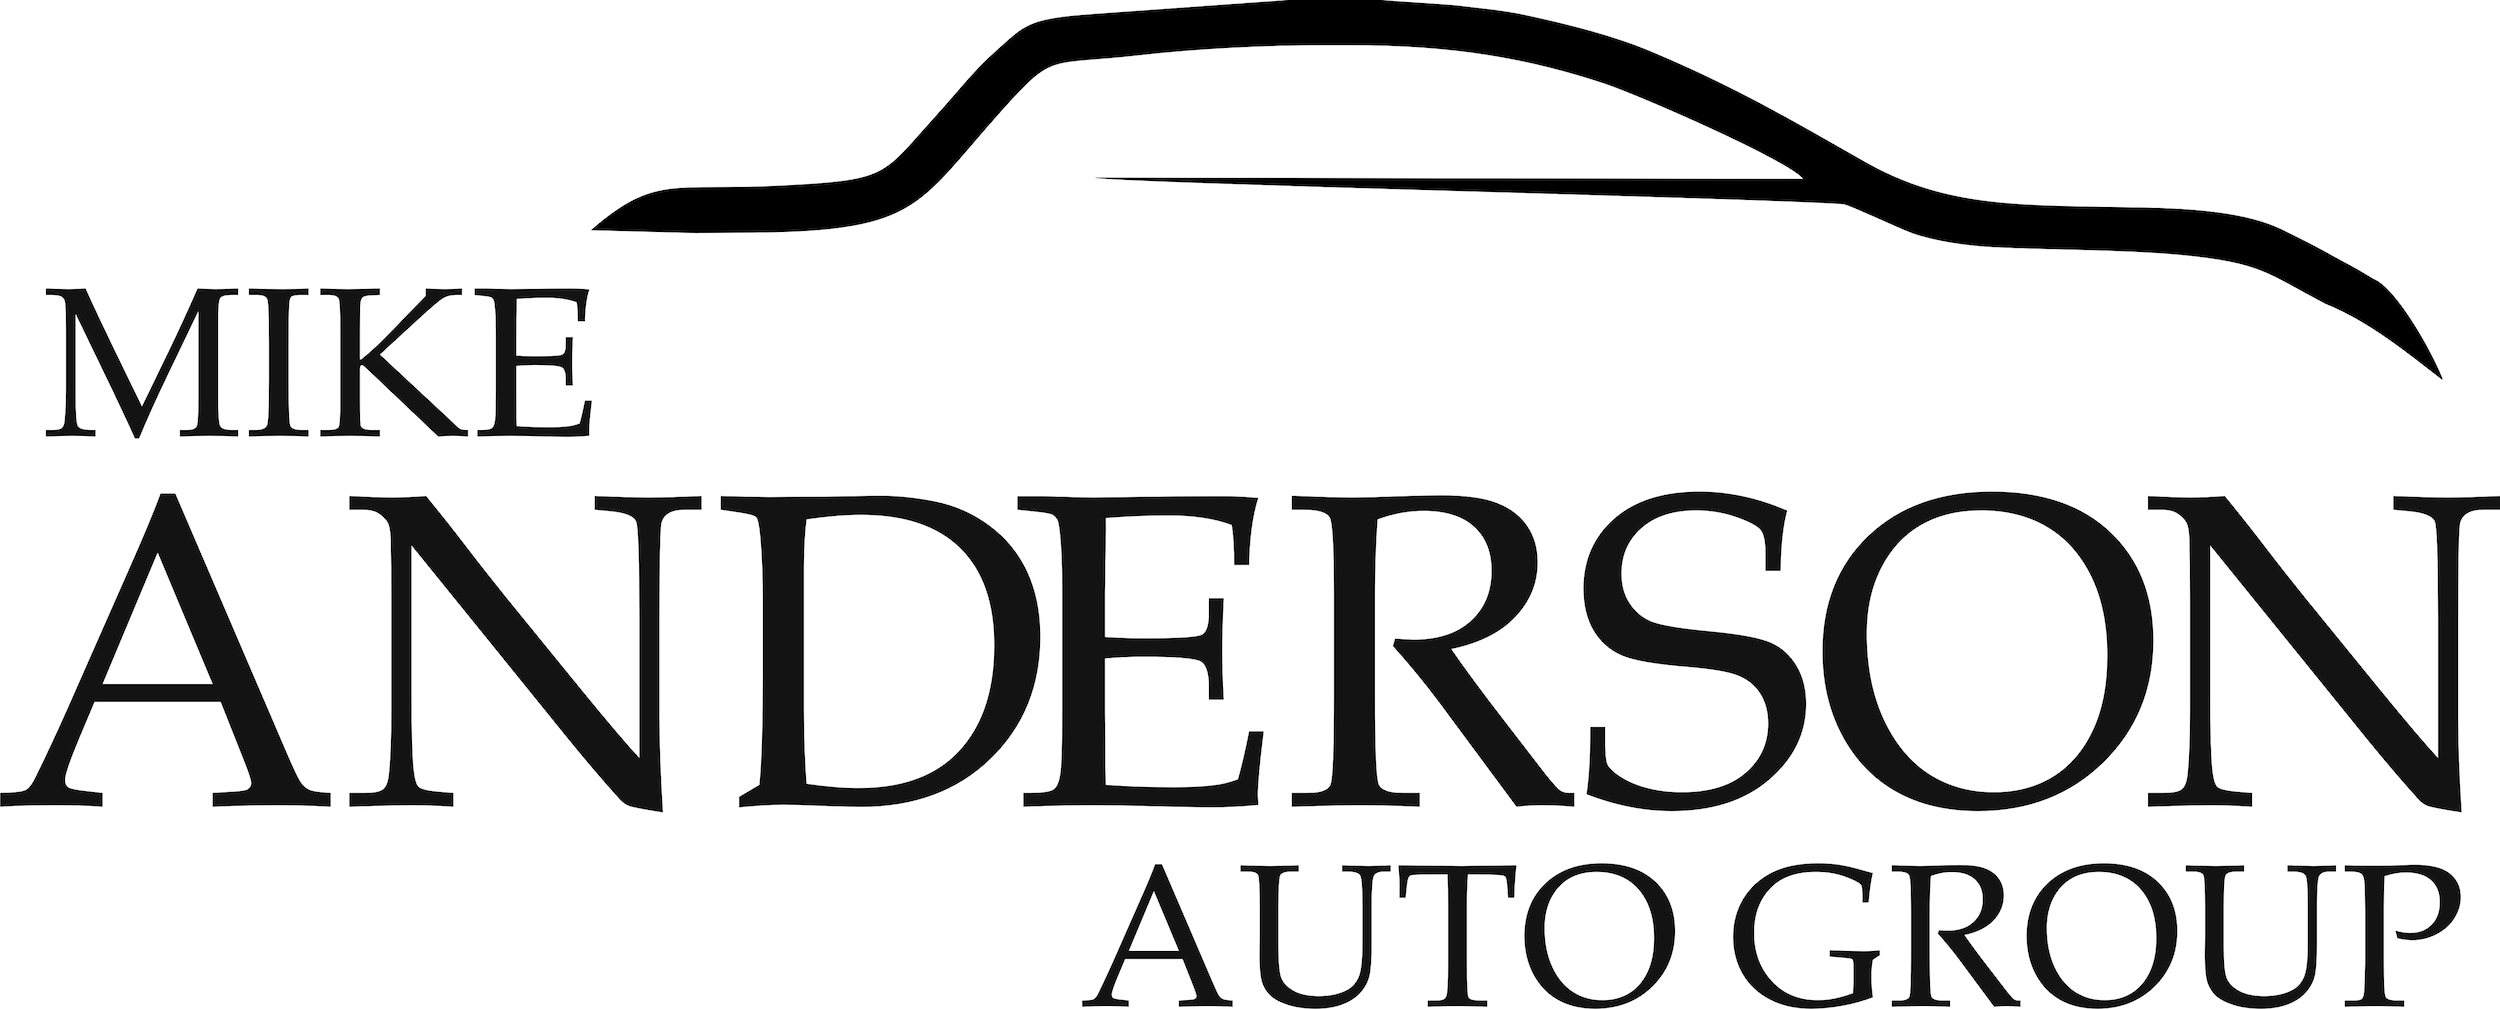 Mike anderson chrysler dodge jeep #2